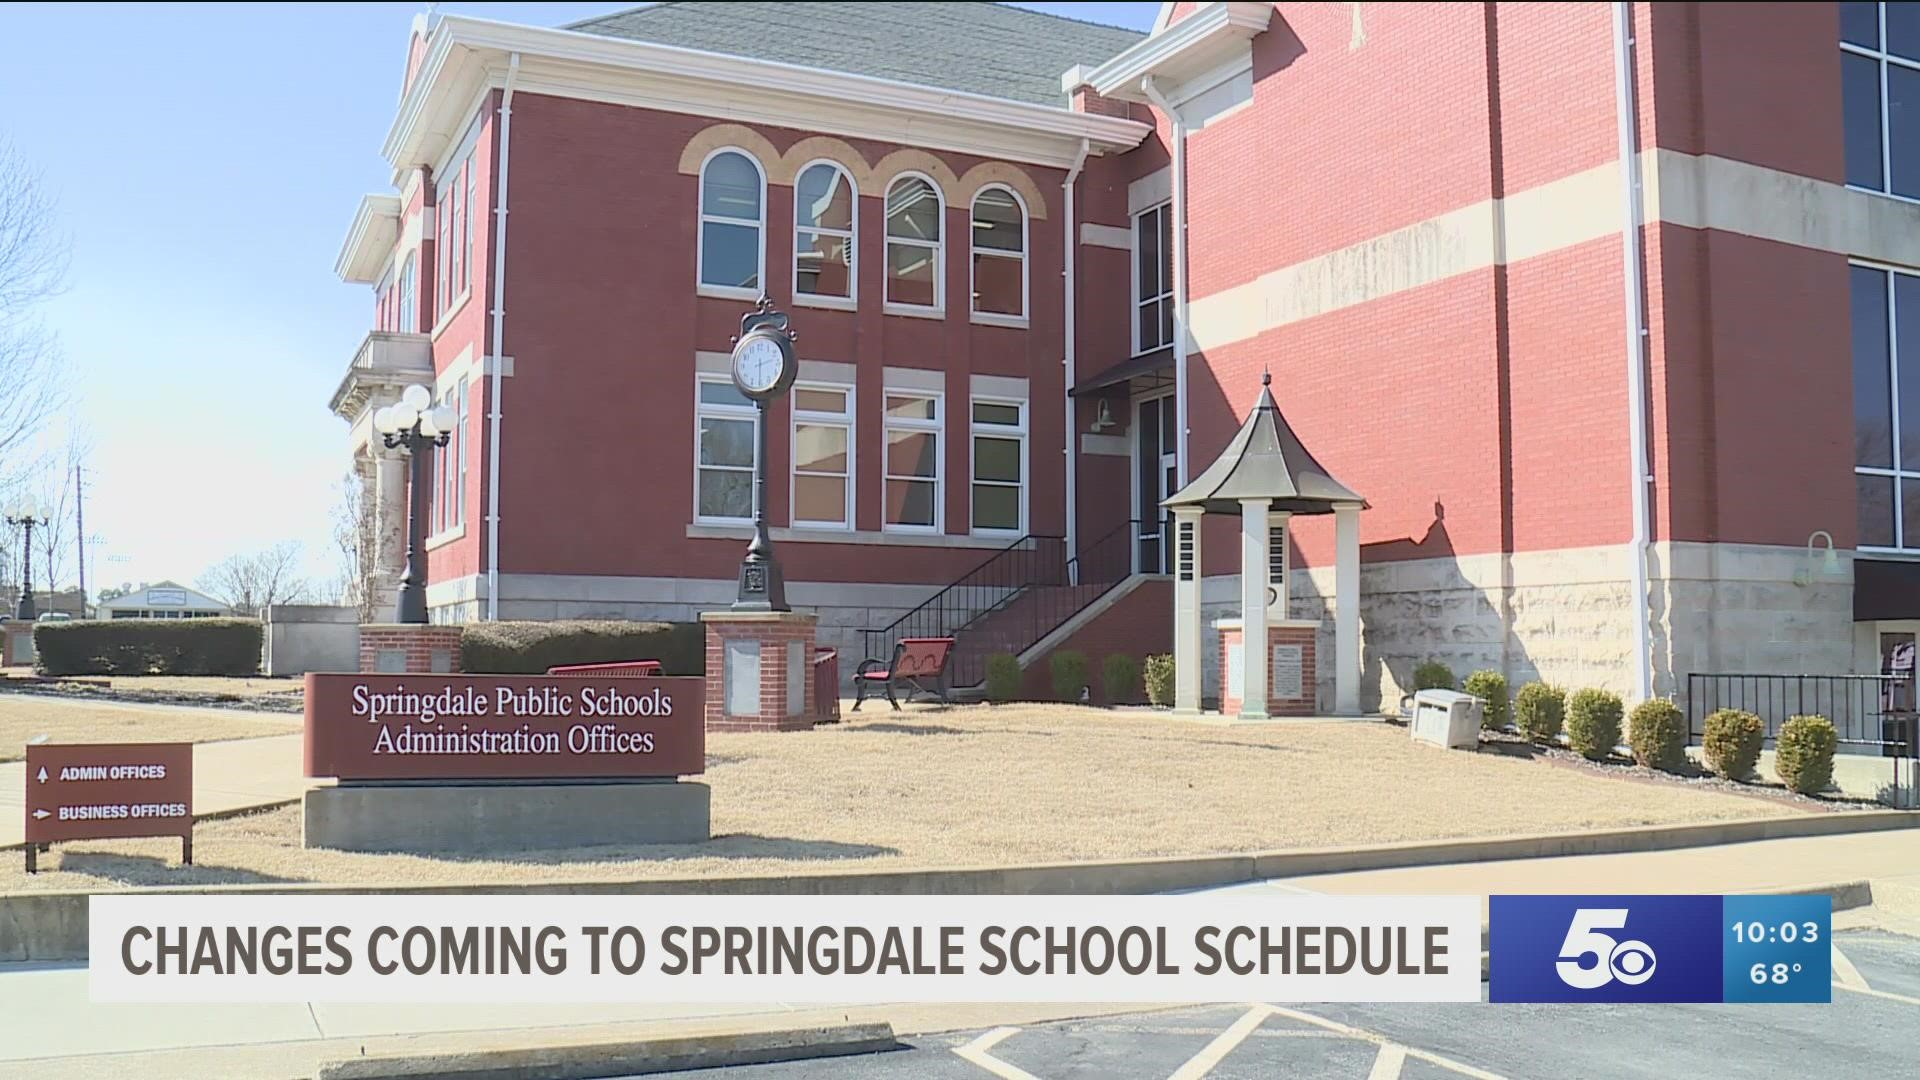 The Springdale School Board voted to do an "early release Wednesday" program which would start in August and give teachers more development time.